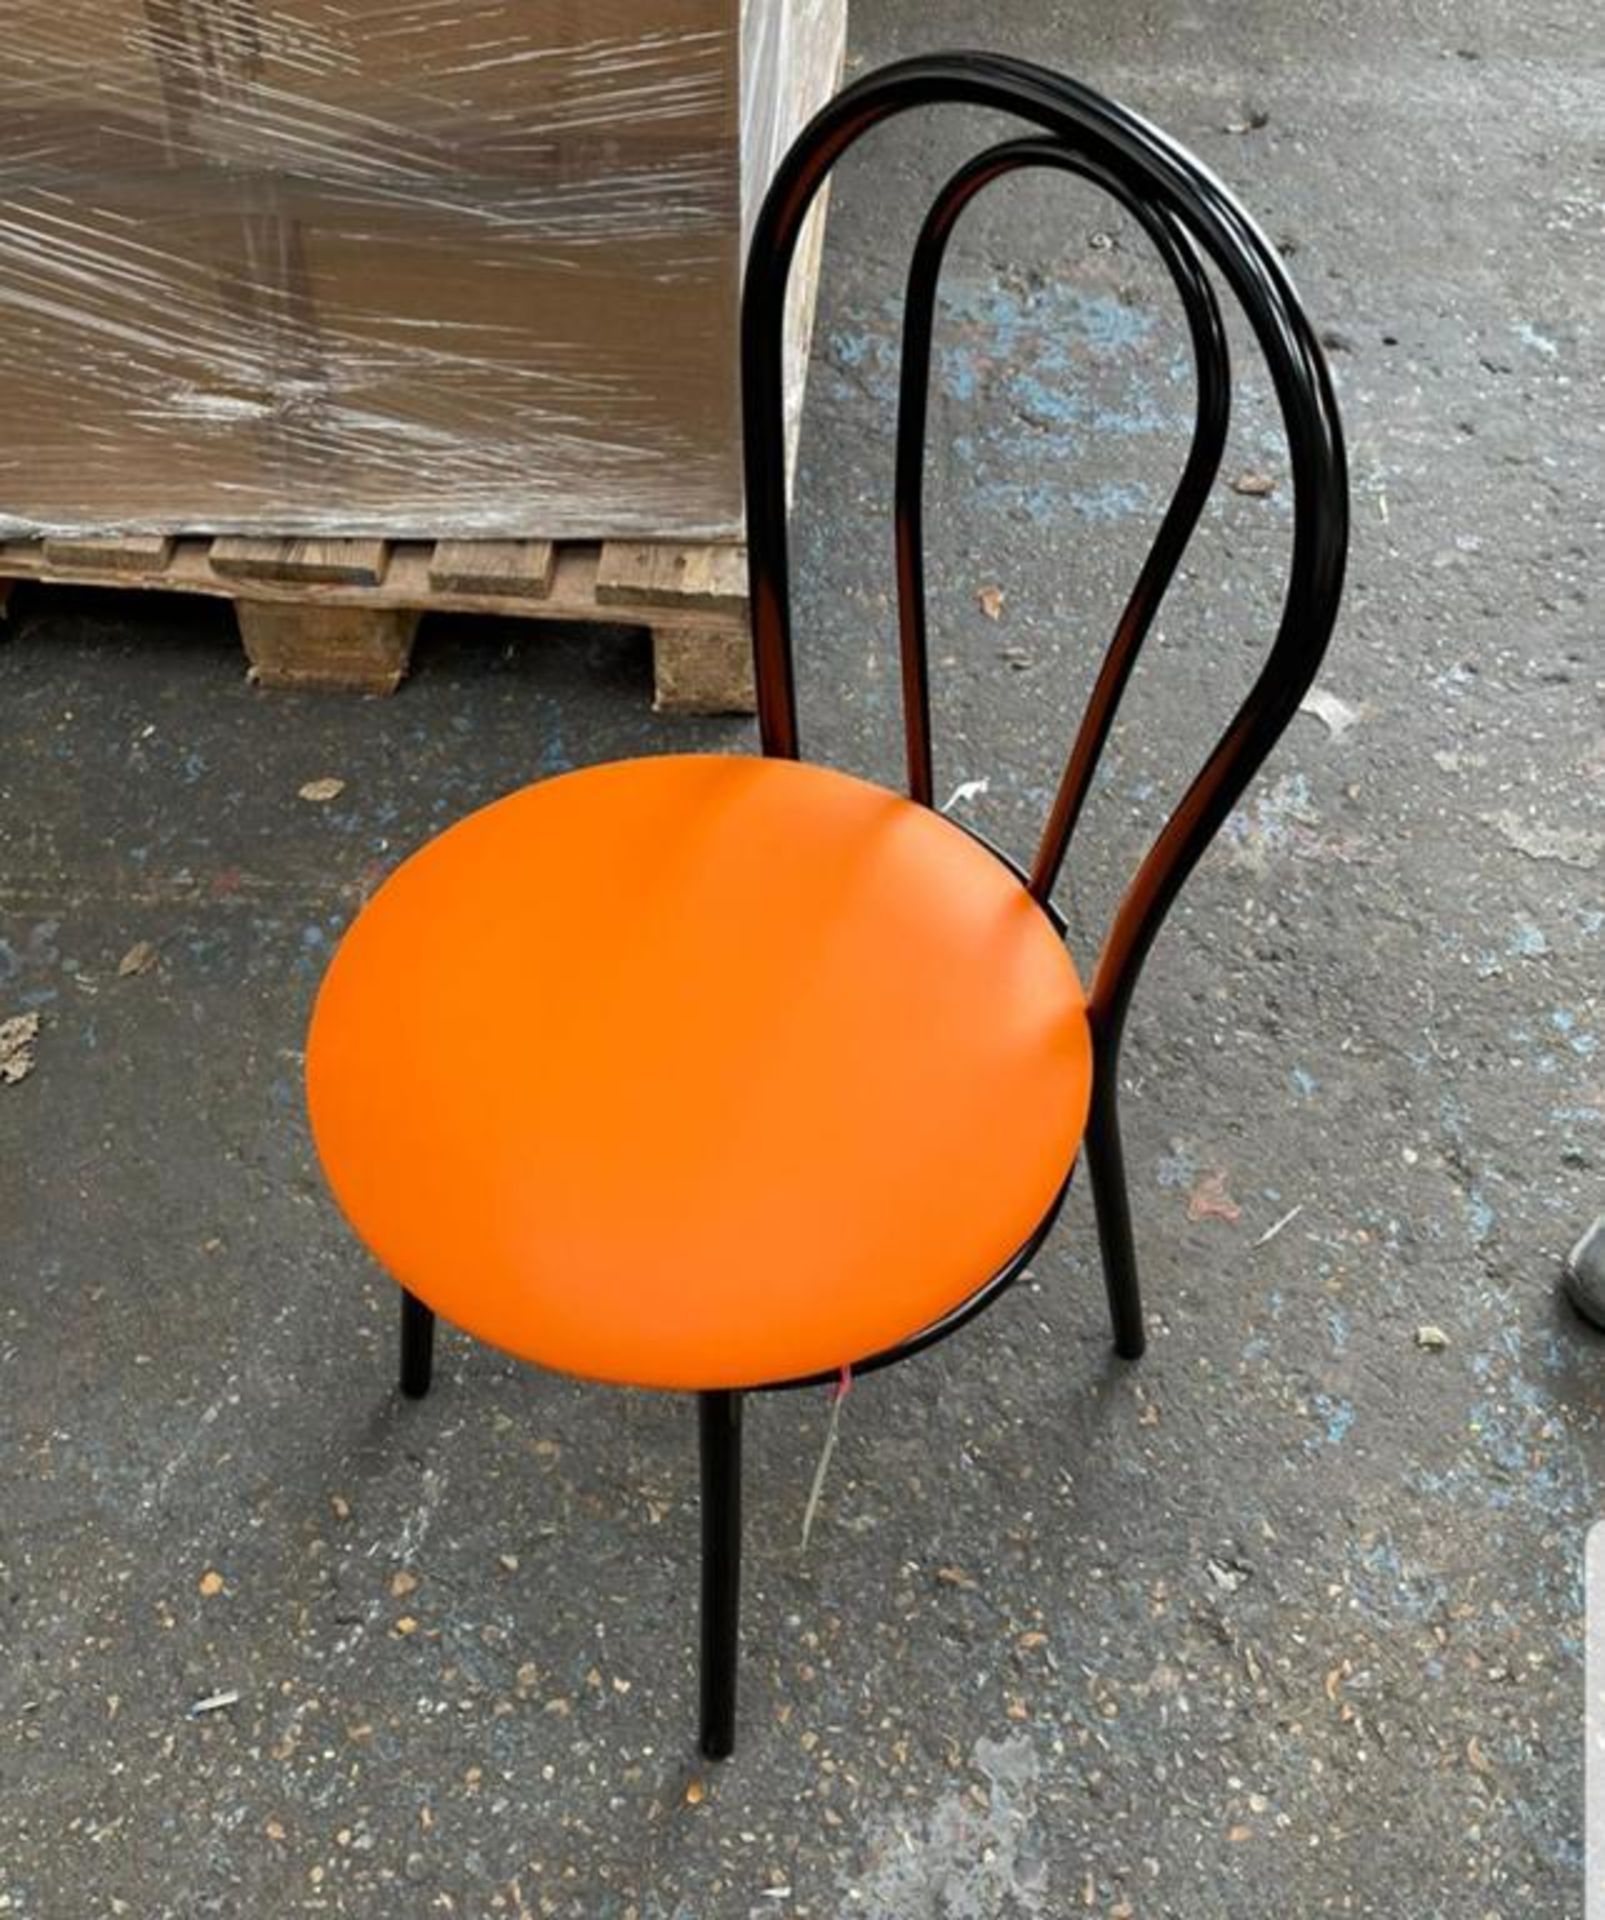 2 x Tulipan Designer Restaurant/Café Chairs by 'nowystyl.com' black chair with orange retro leather